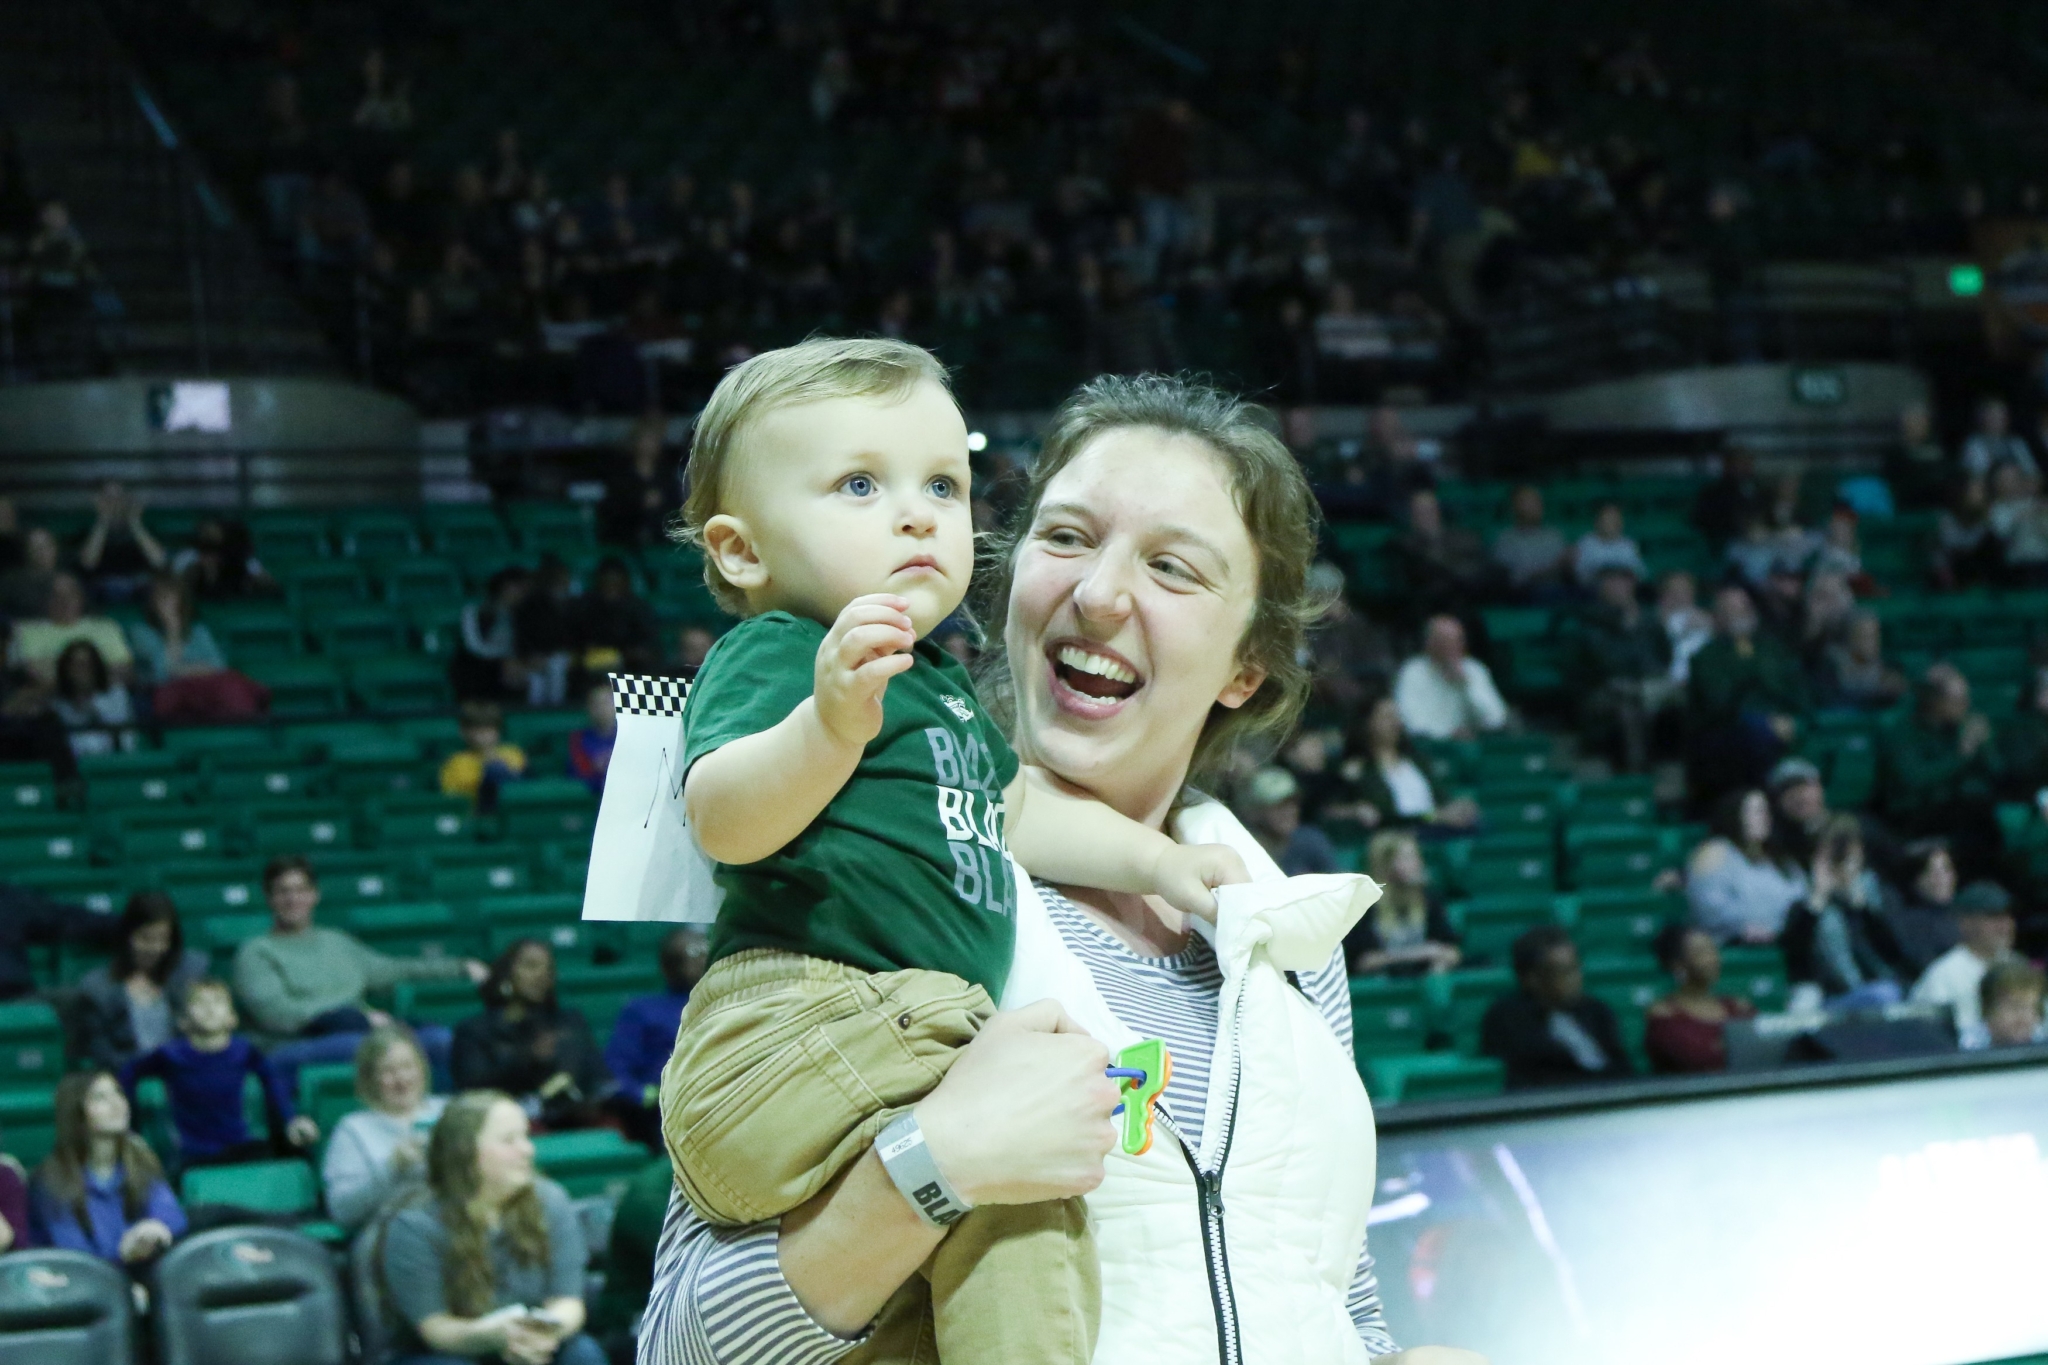 Baby blazers 4 Grab your cameras! UAB's 4th Annual Little Blazers Baby Race is Saturday, Jan 25